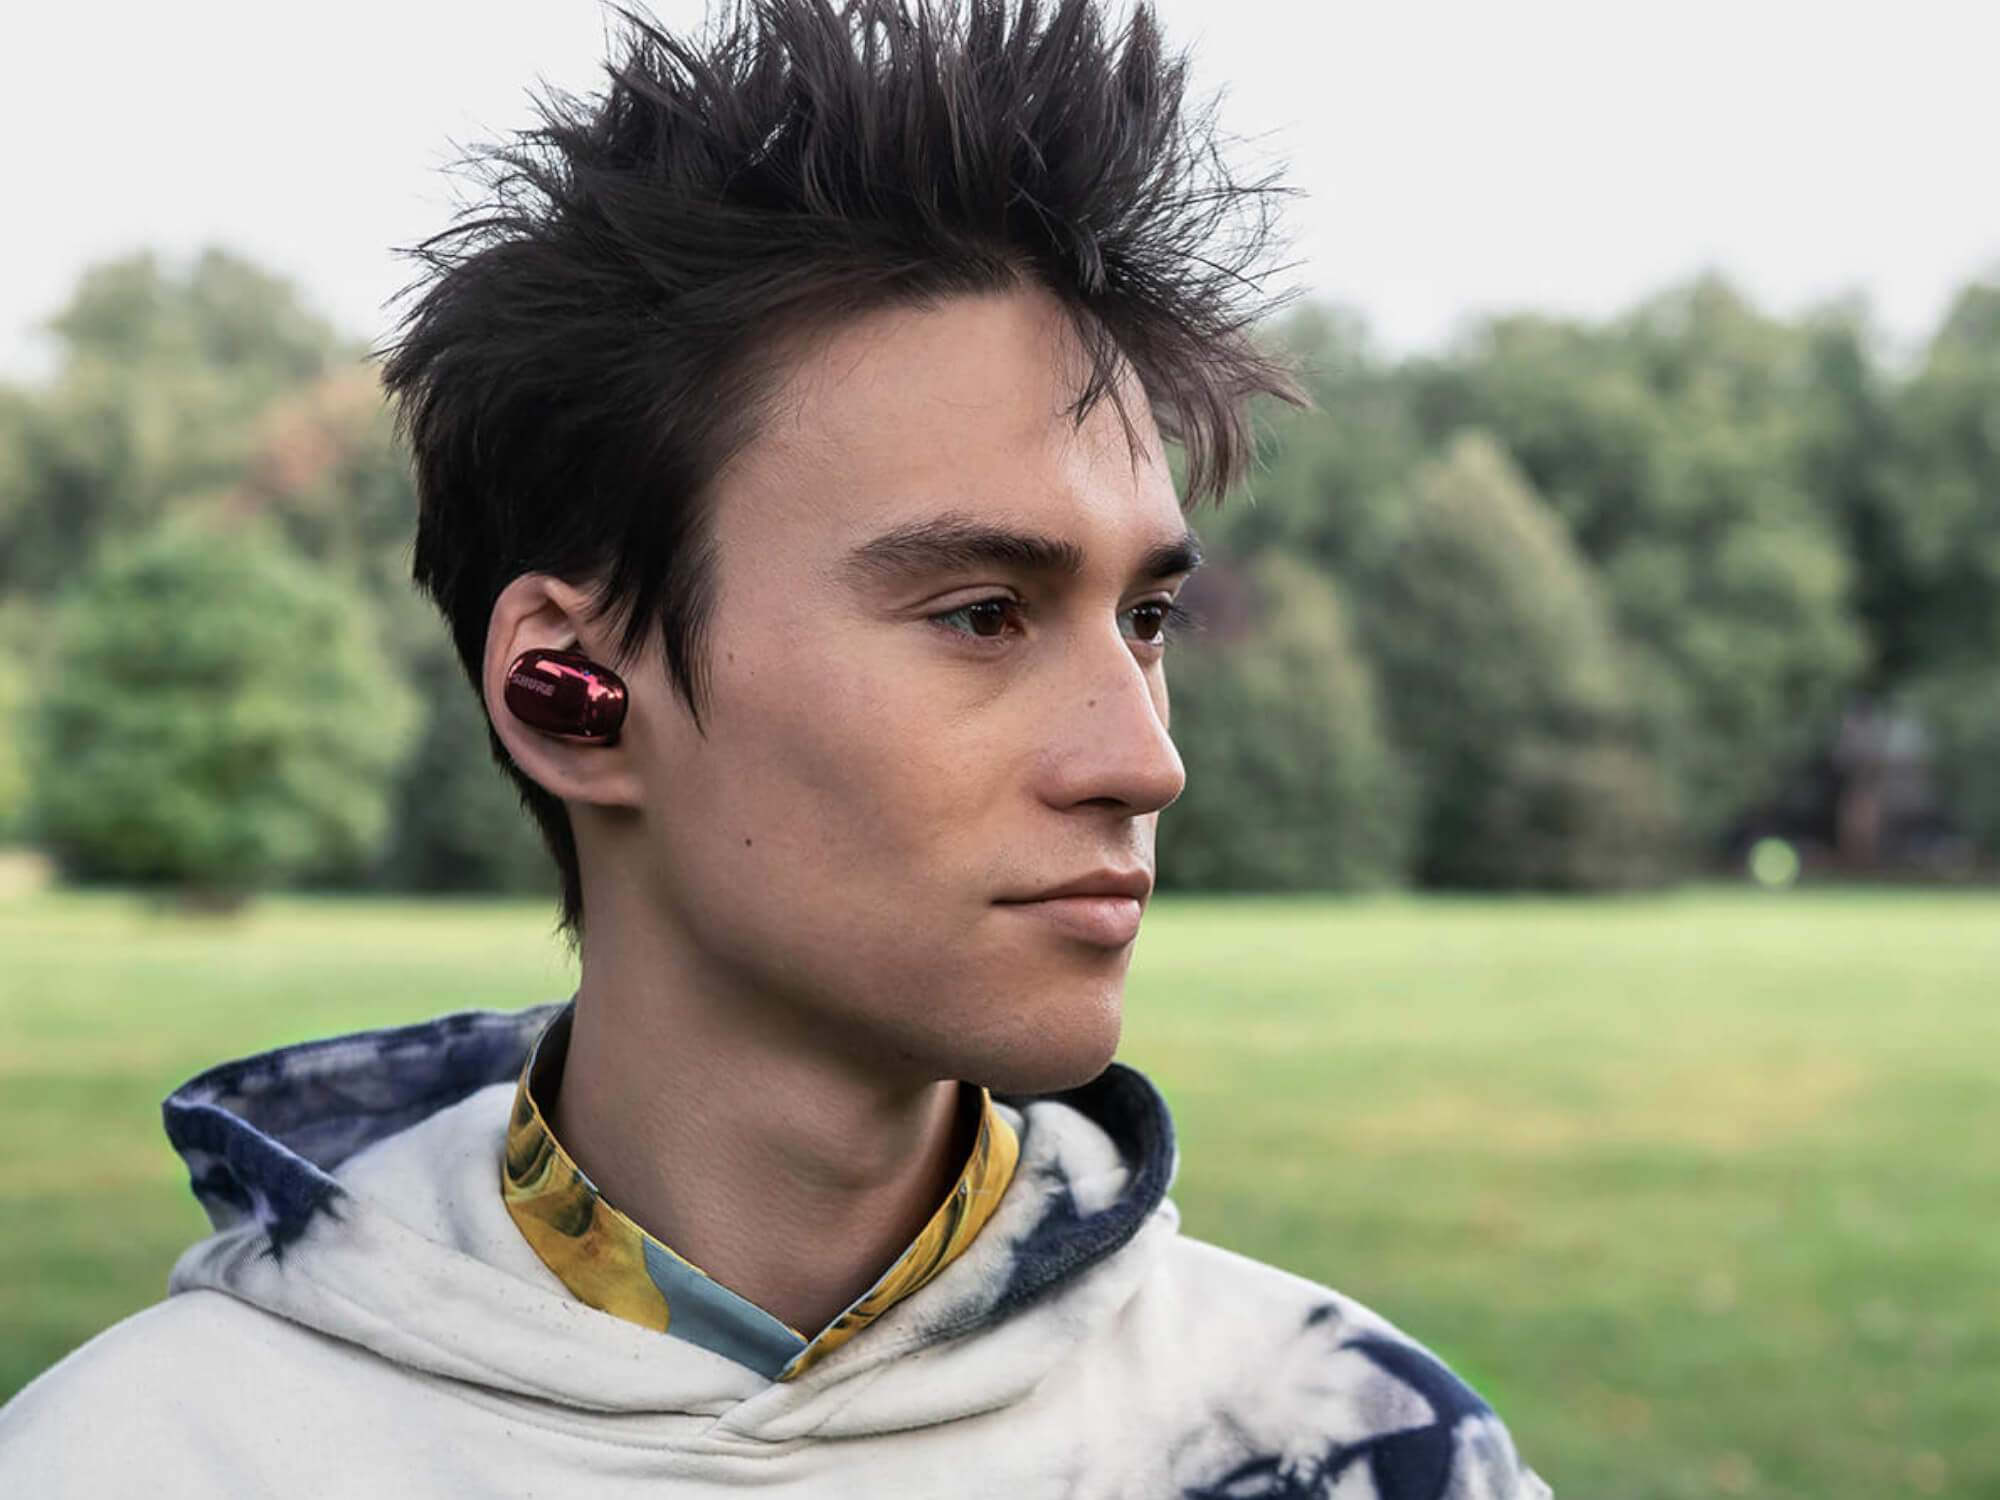 Jacob Collier with Shure Aonic Free earbuds